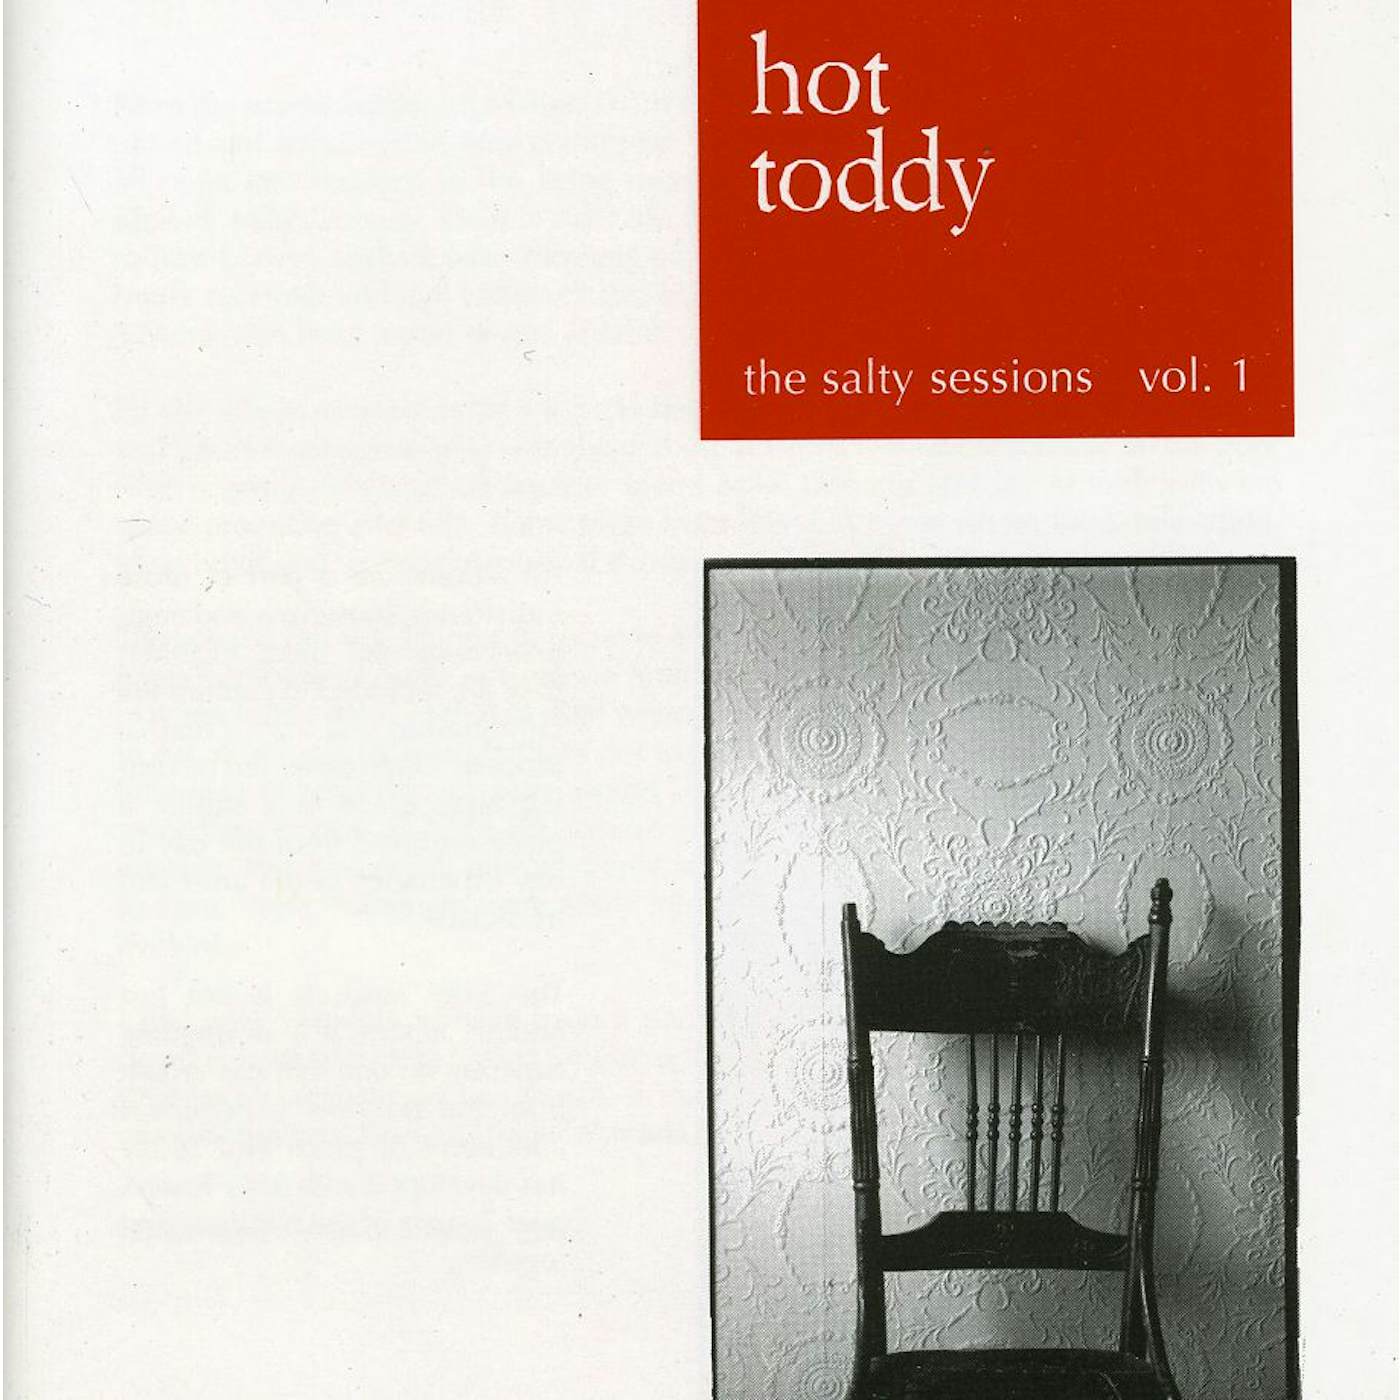 Hot Toddy SALTY SESSIONS 1 CD